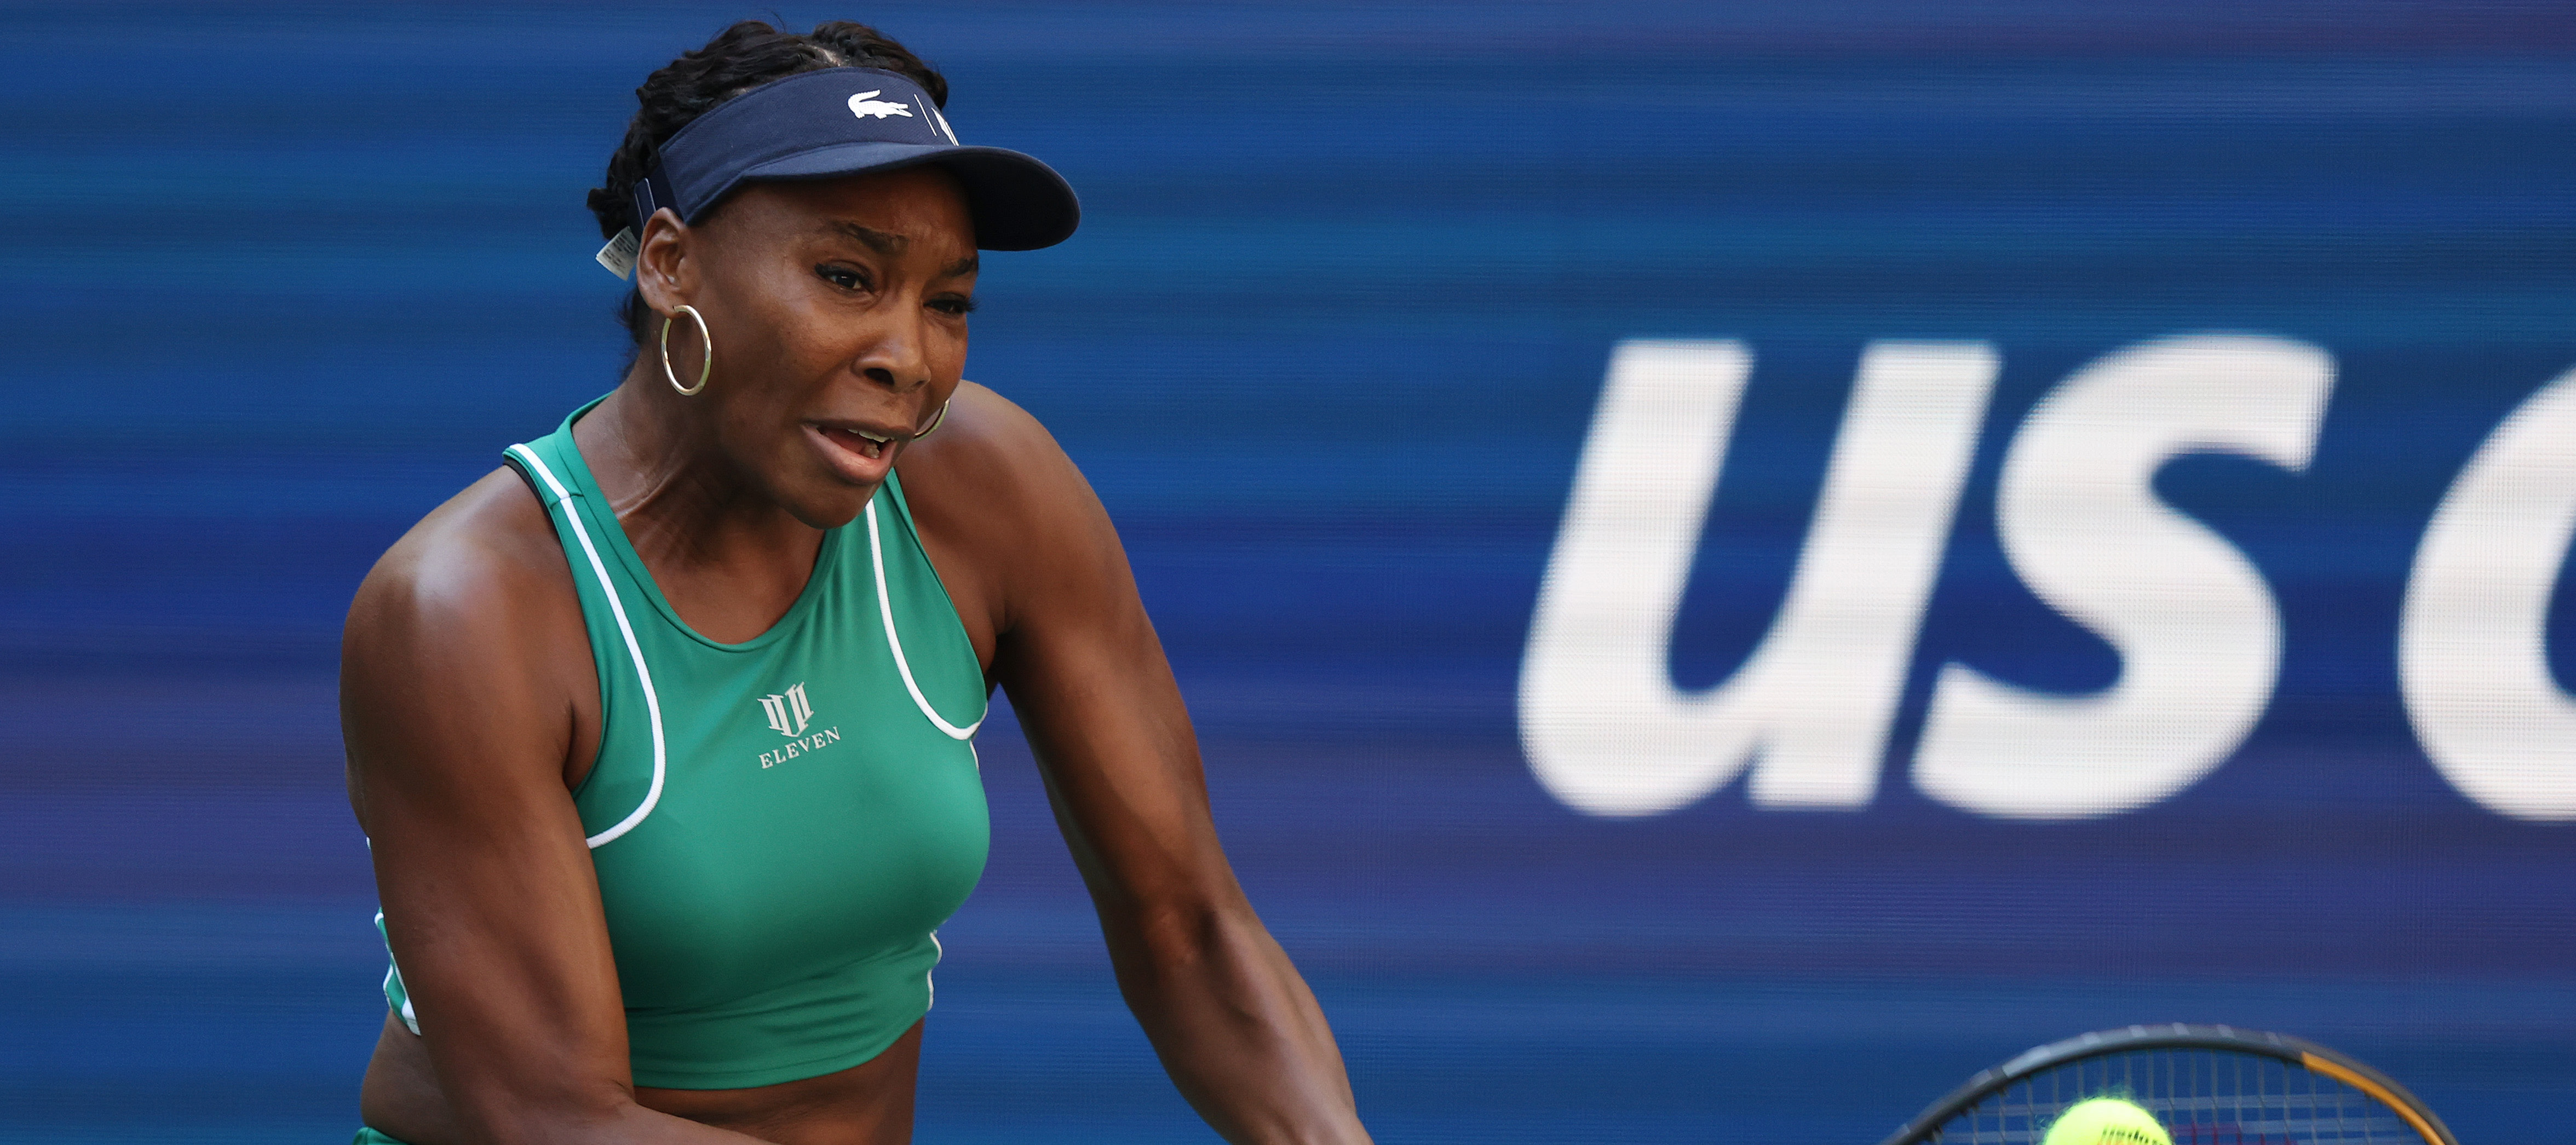 Venus Williams accepts ASB Classic wild card, to start 2023 season in Auckland